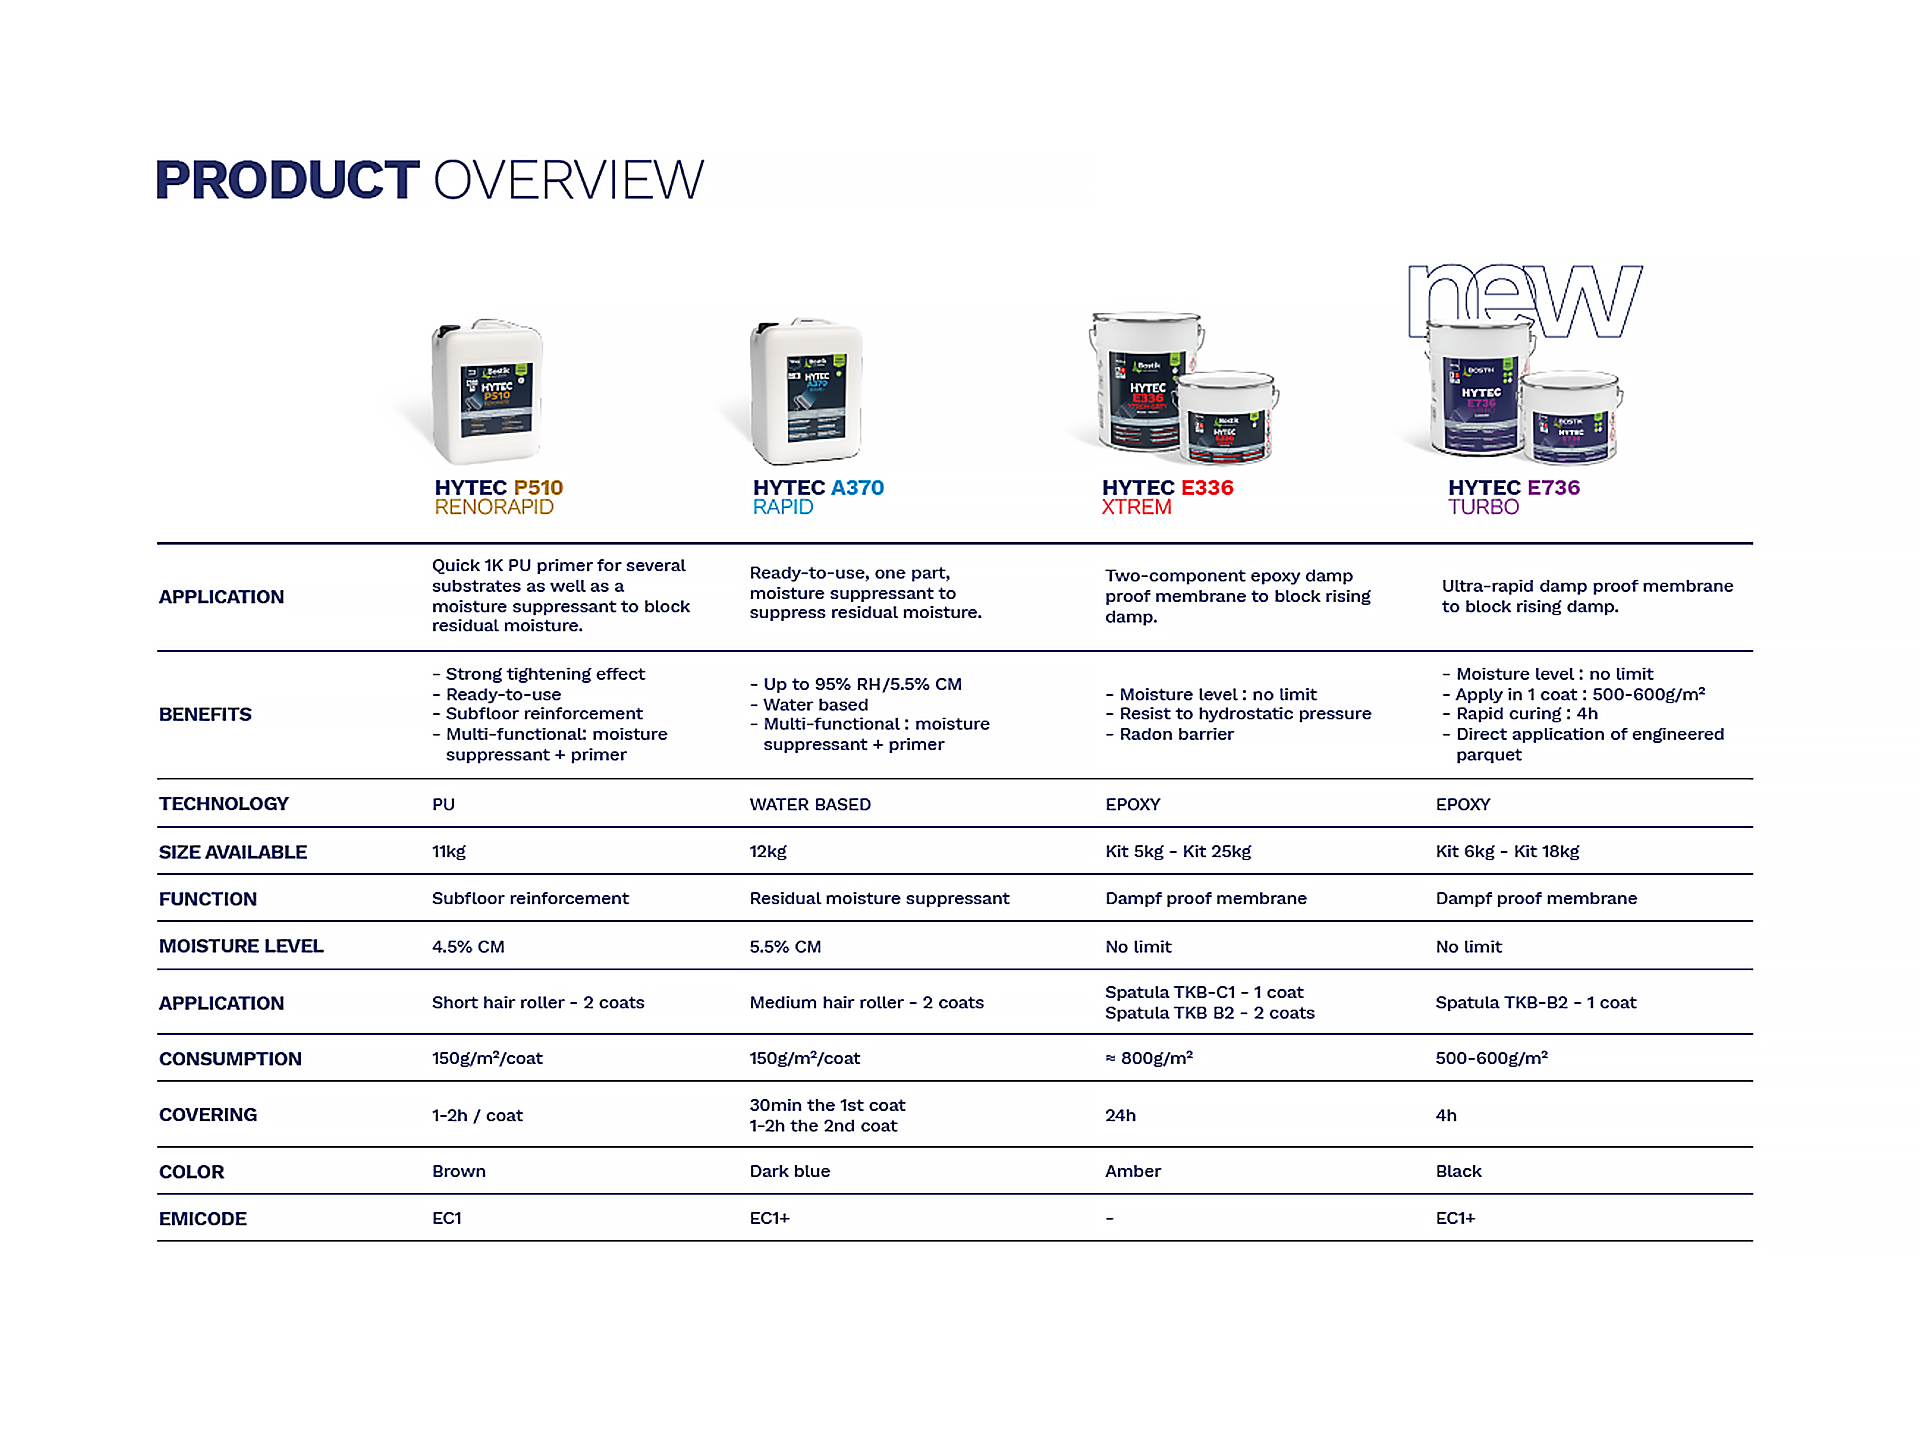 Product Range Overview of Damp Proof Membranes